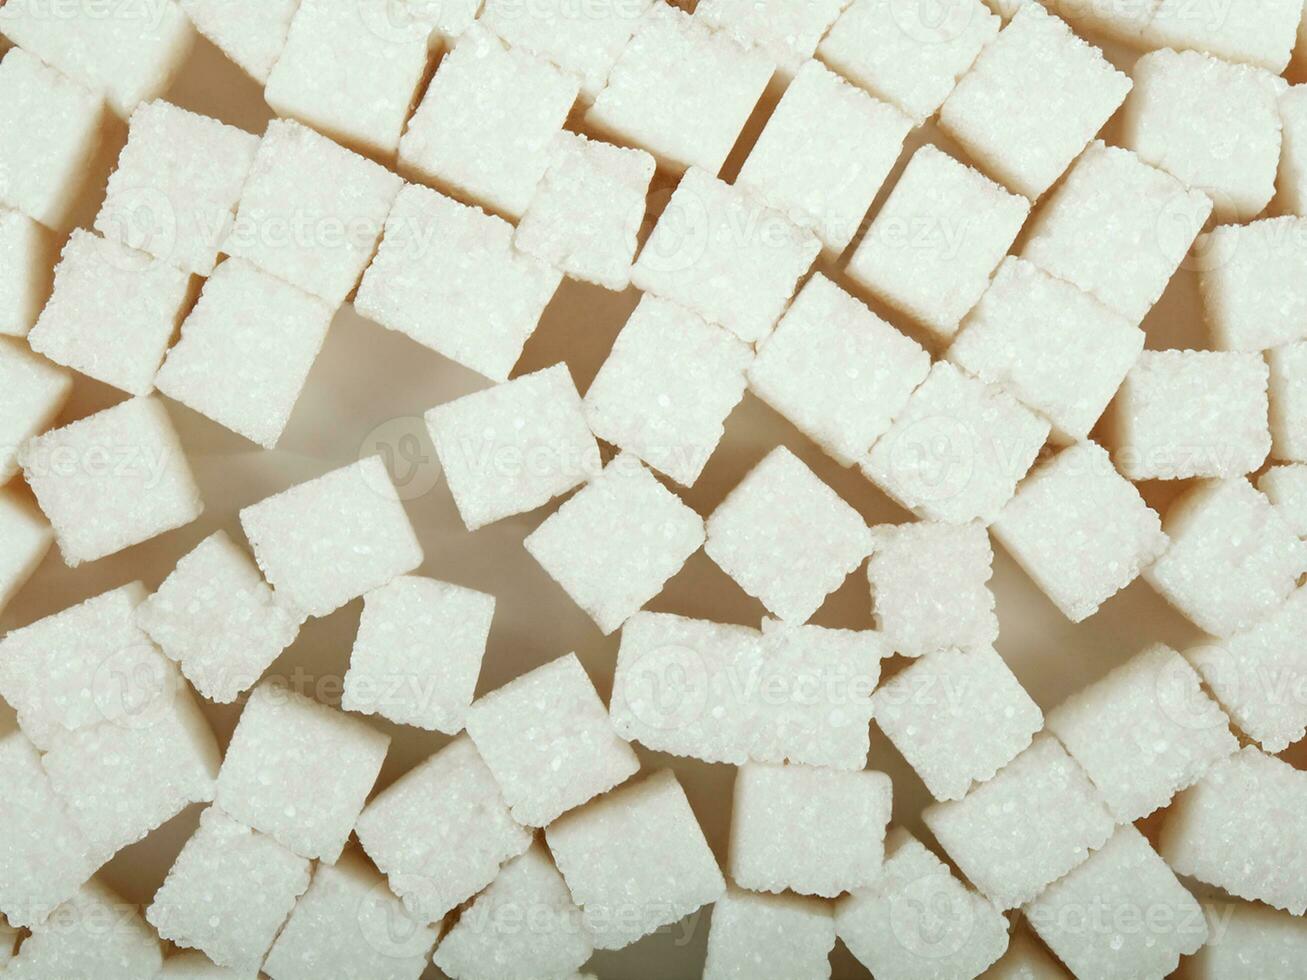 white sugar cubes on a wooden surface, background photo